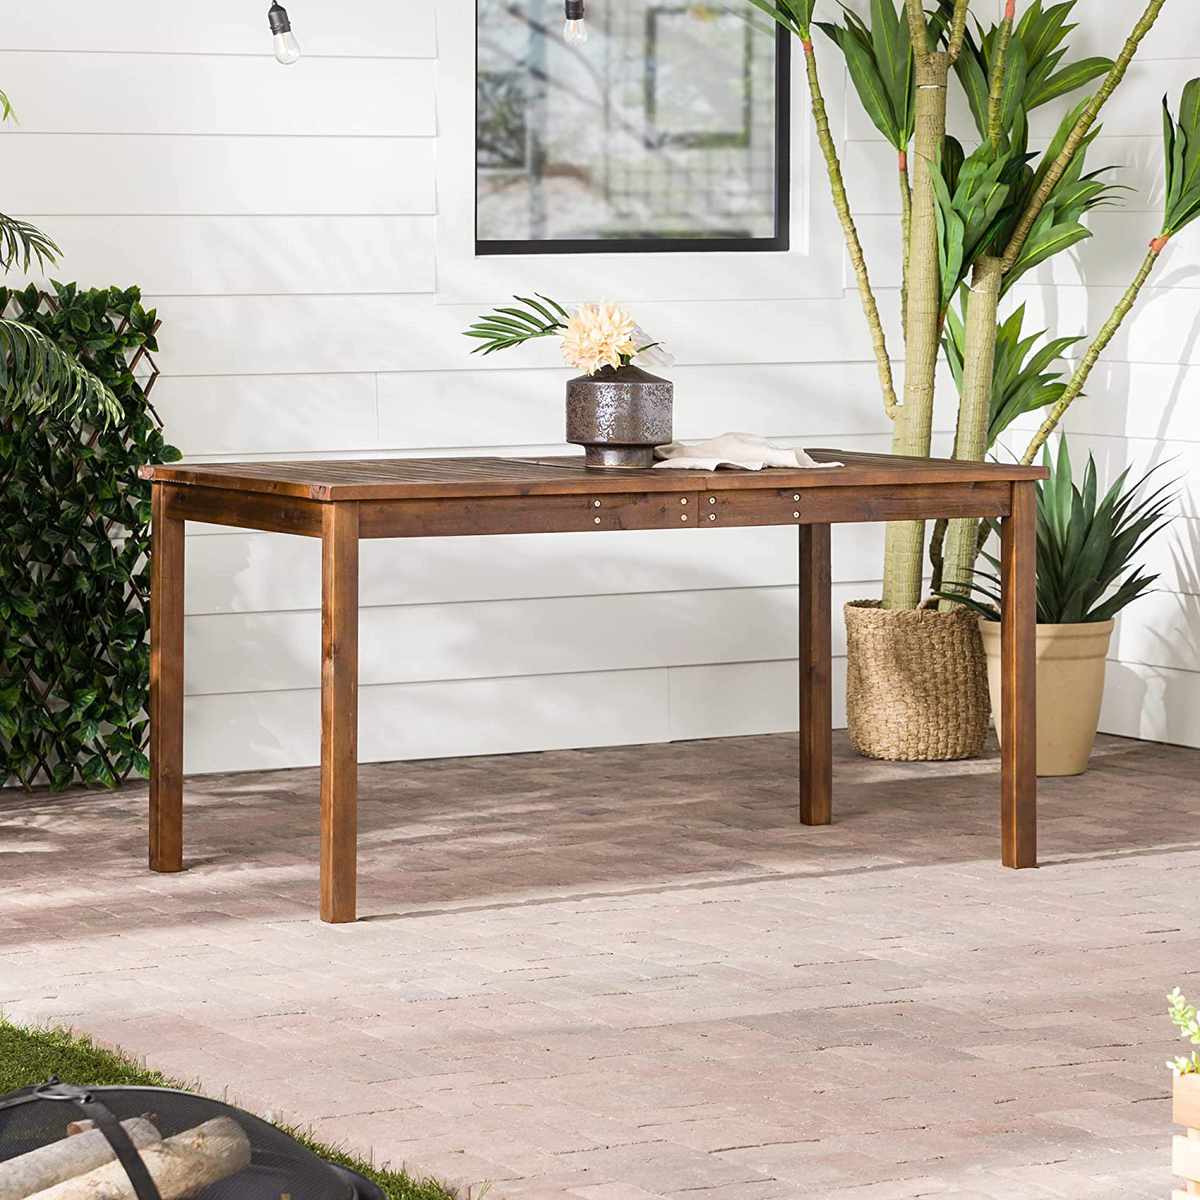 Walker Edison Dominica Contemporary Slatted Outdoor Dining Table